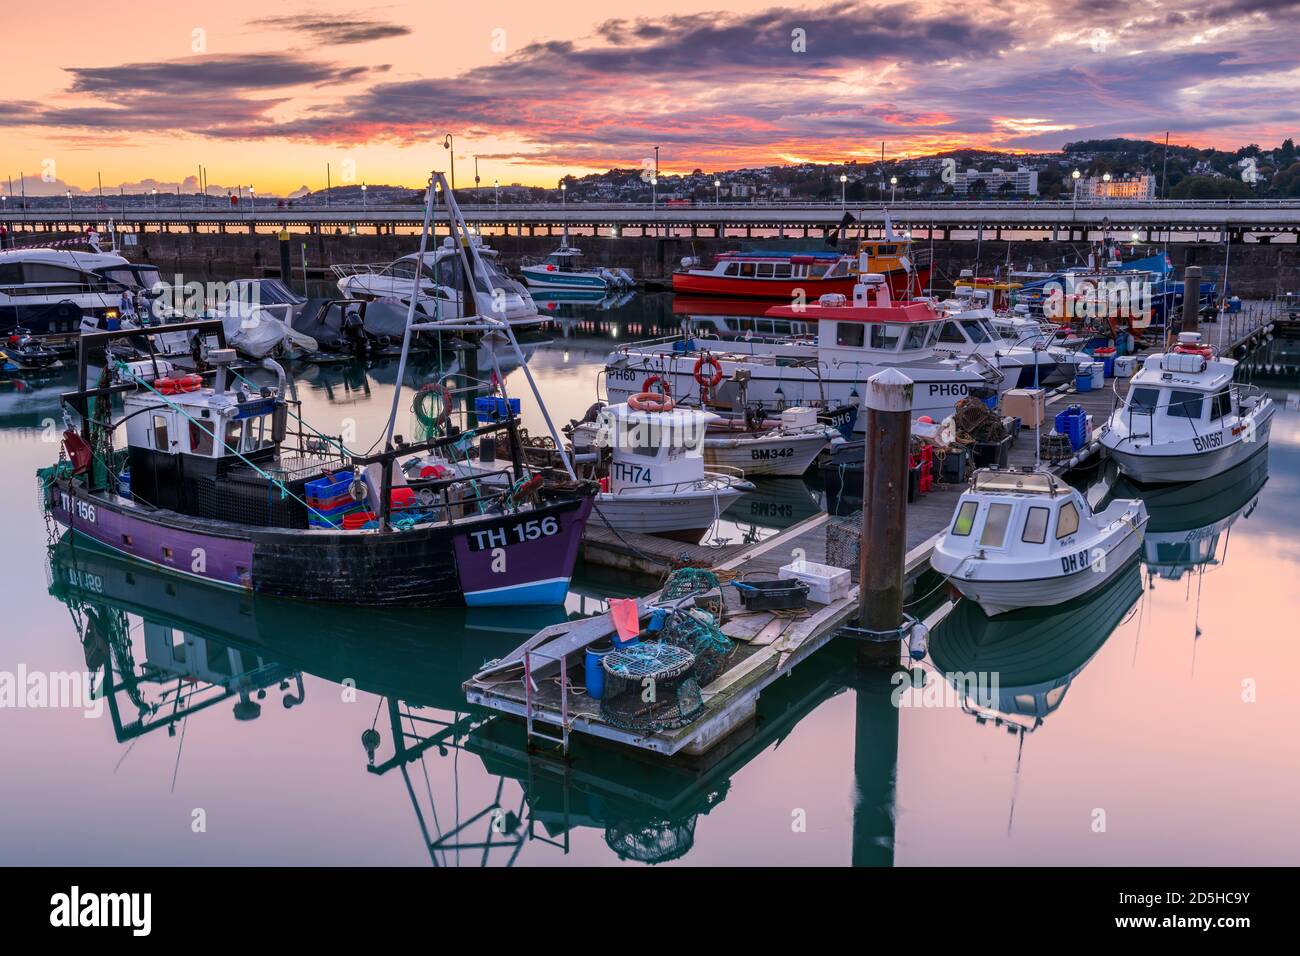 Tuesday 13th October 2020. Torquay, South Devon, England. After a day of sunshine and showers on the south coast, as the sun sets a colourful sky lights up the calm waters of the marina at Torquay on 'The English Riviera' in South Devon. Credit: Terry Mathews/Alamy Live News Stock Photo